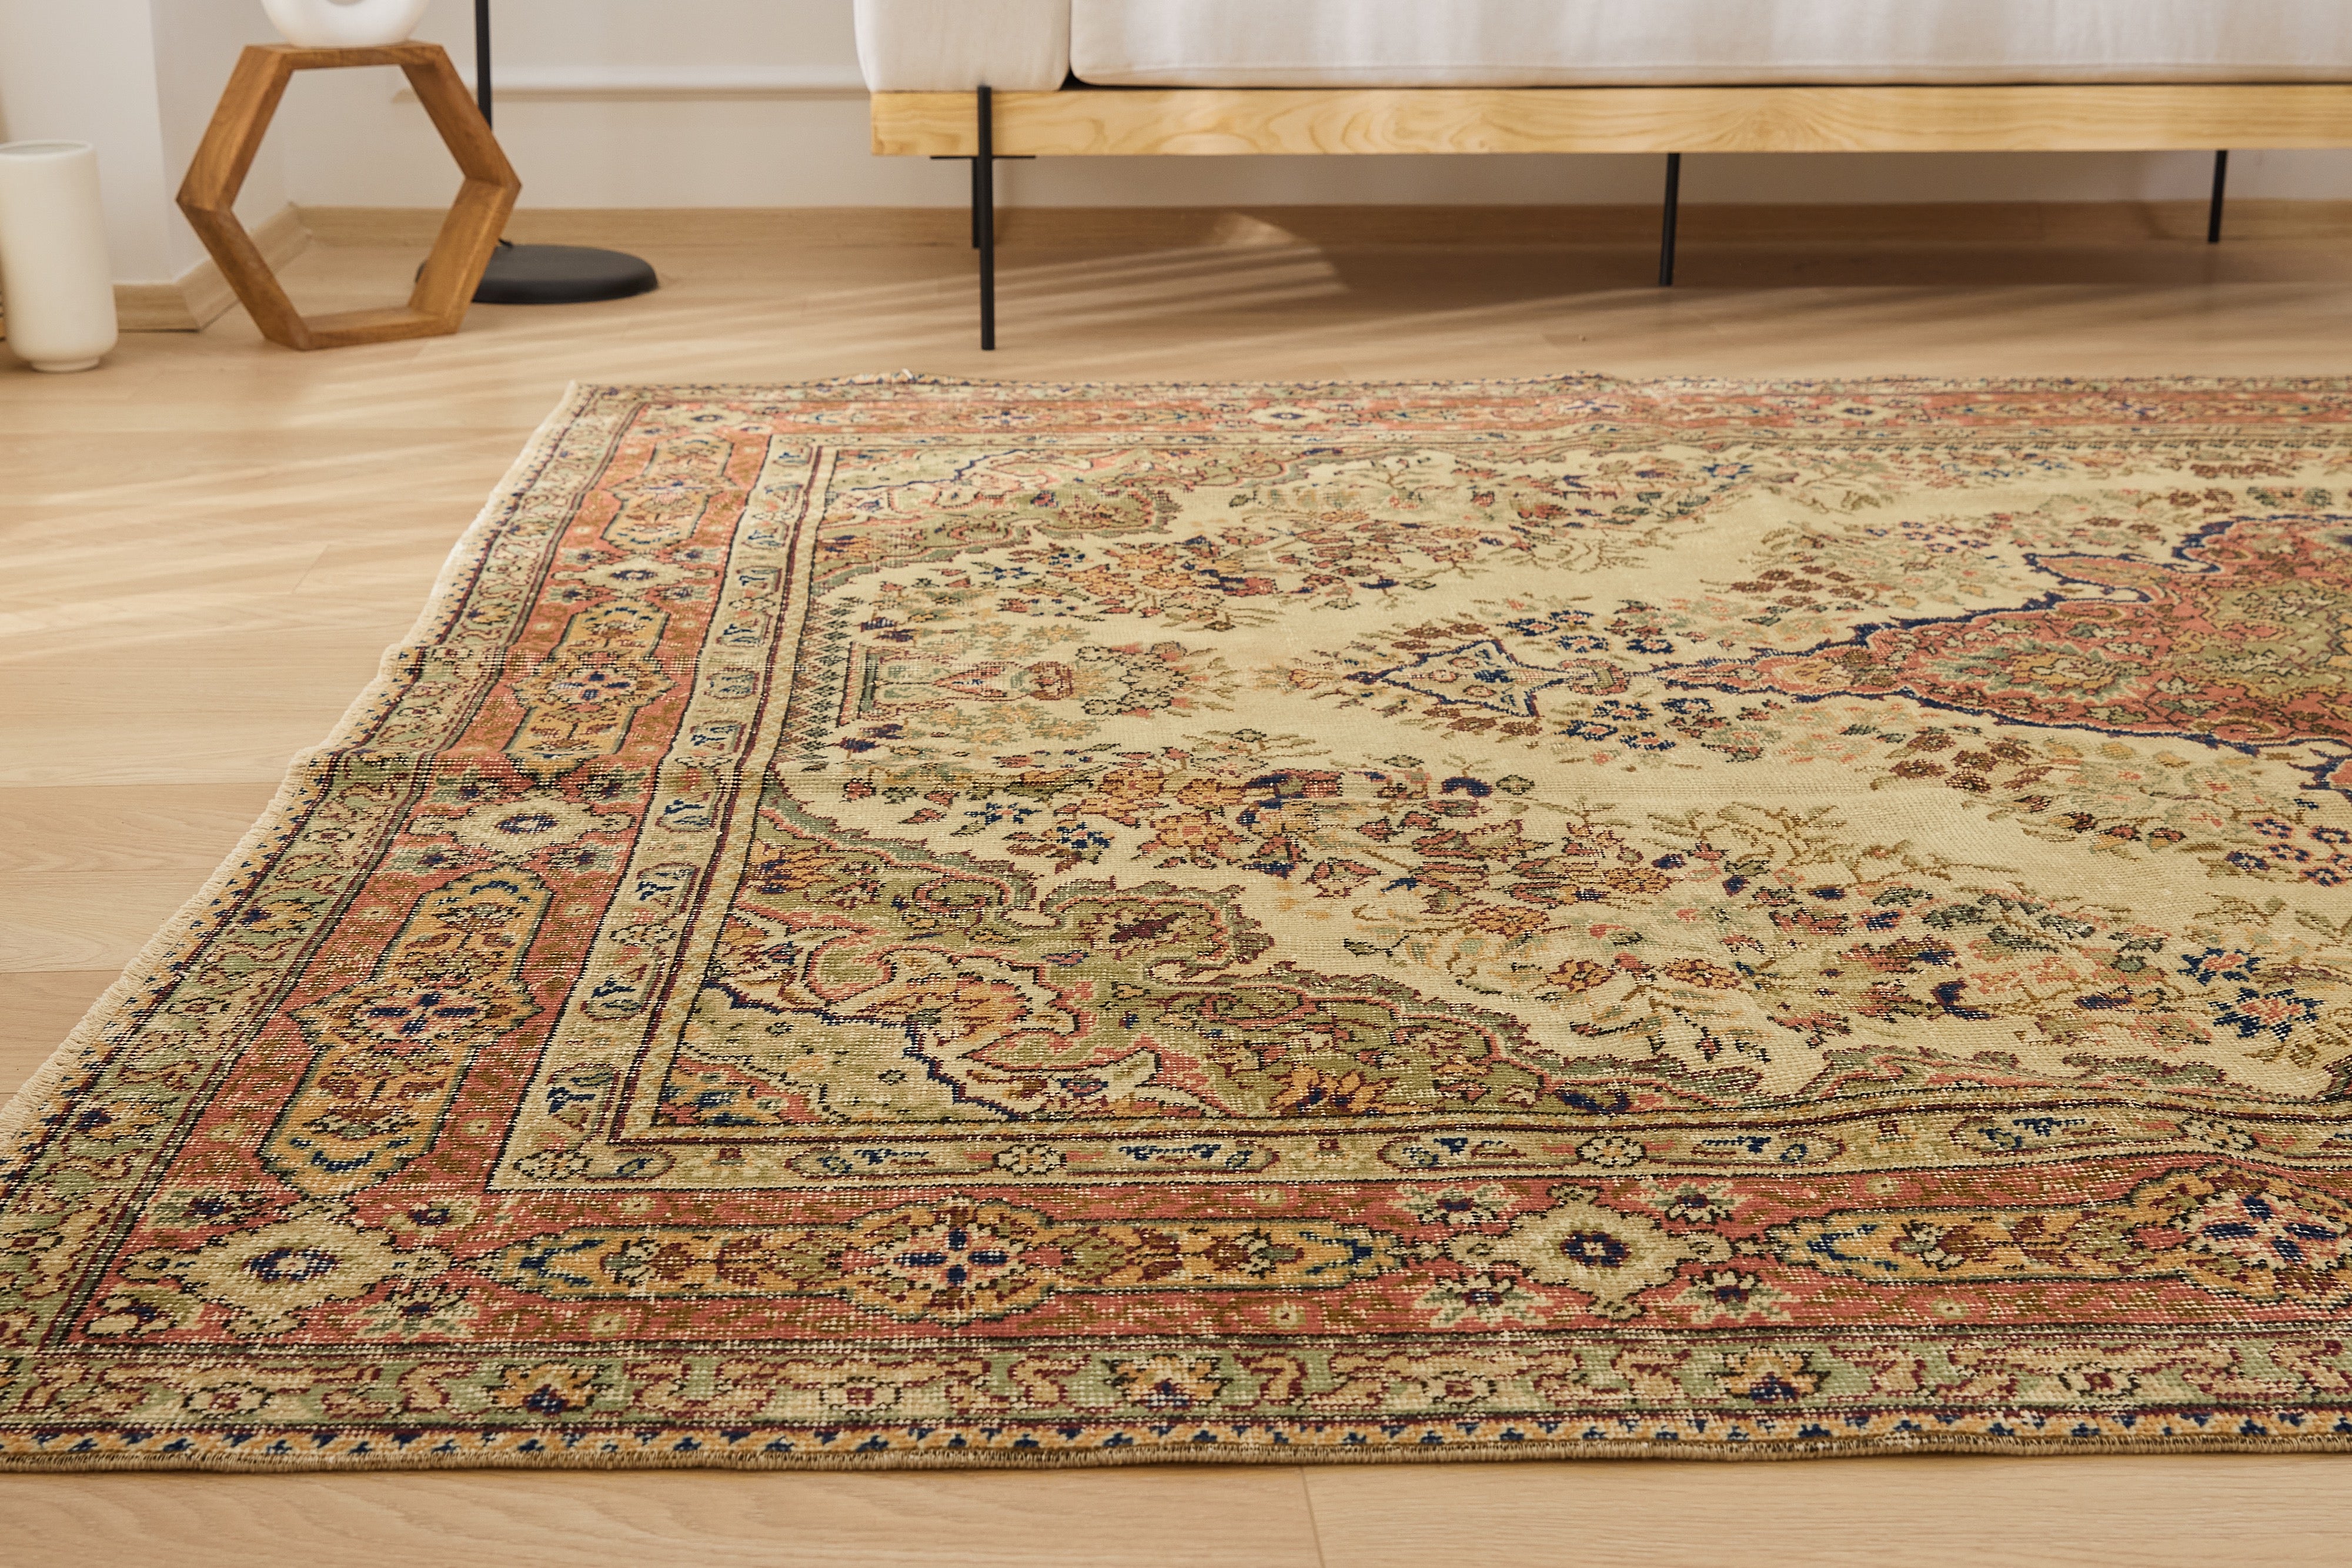 Evie's Allure | Authentic Turkish Rug | Hand-Knotted Carpet | Kuden Rugs